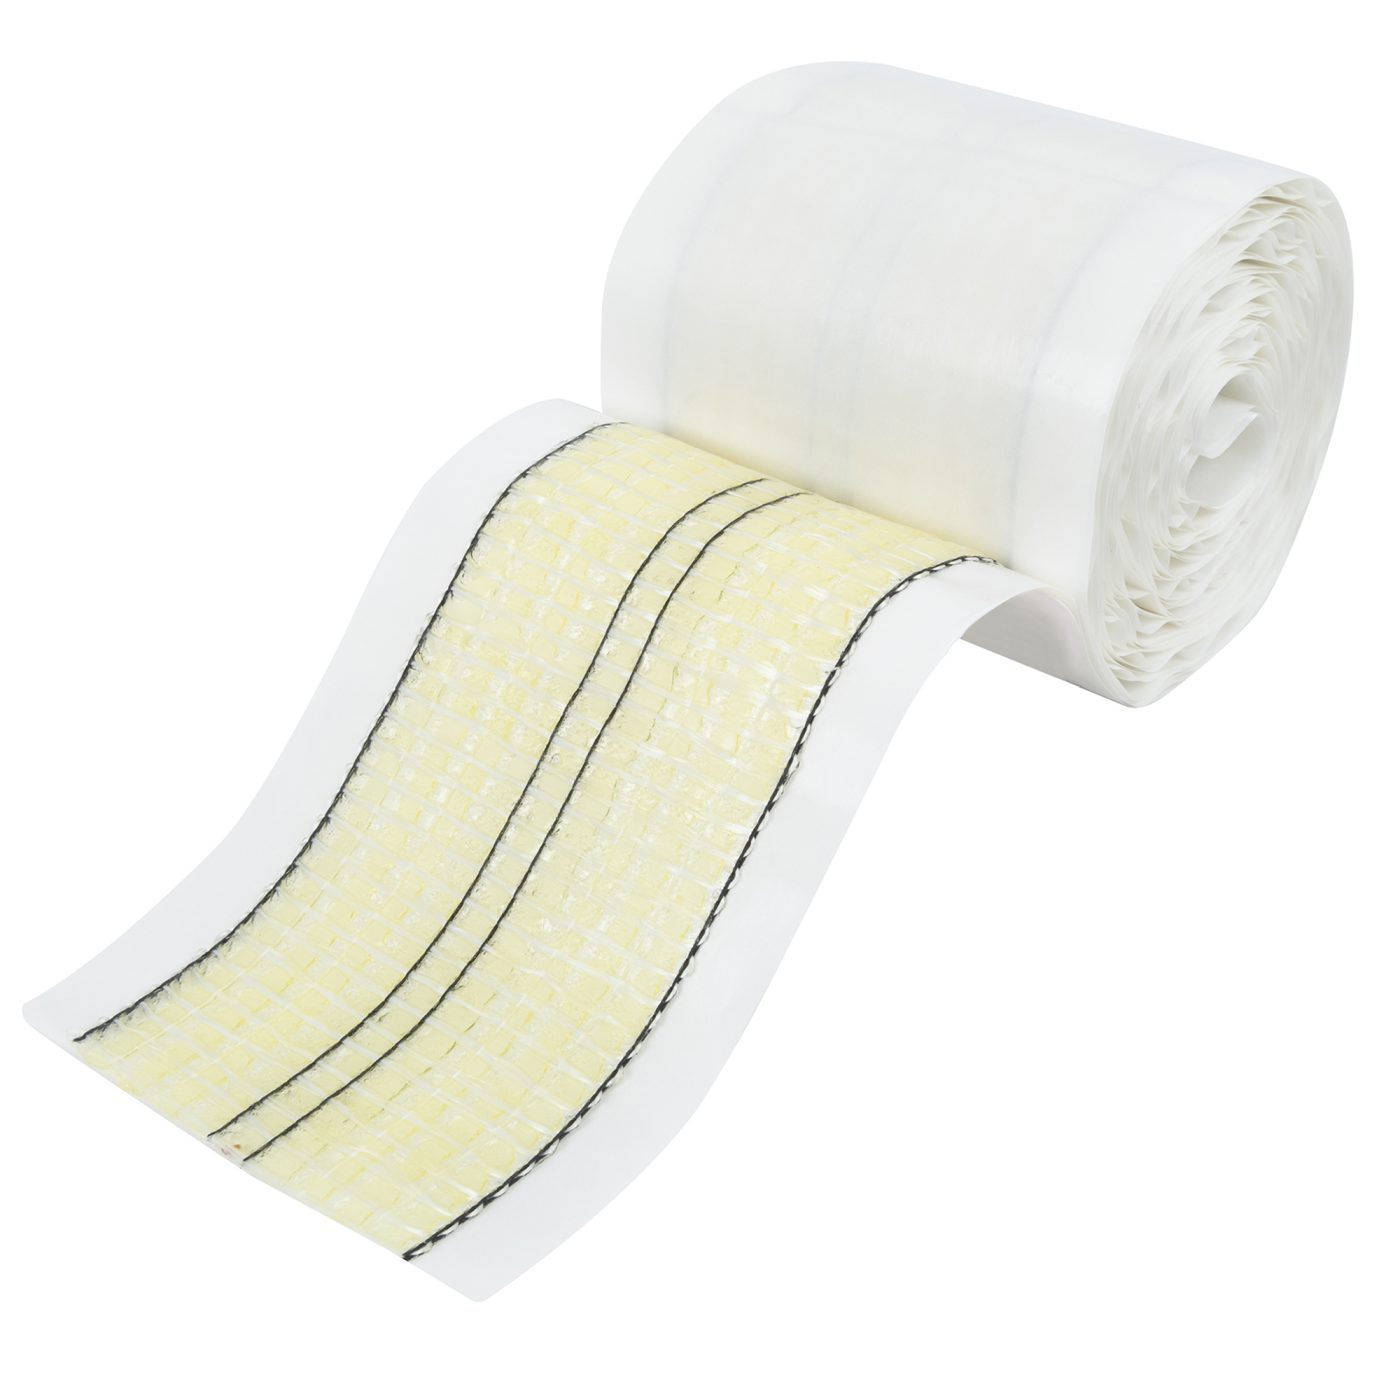 REVO Double Sided Carpet Tape - Carpet & Rug Tape / 3 Sizes / MADE IN THE  USA!